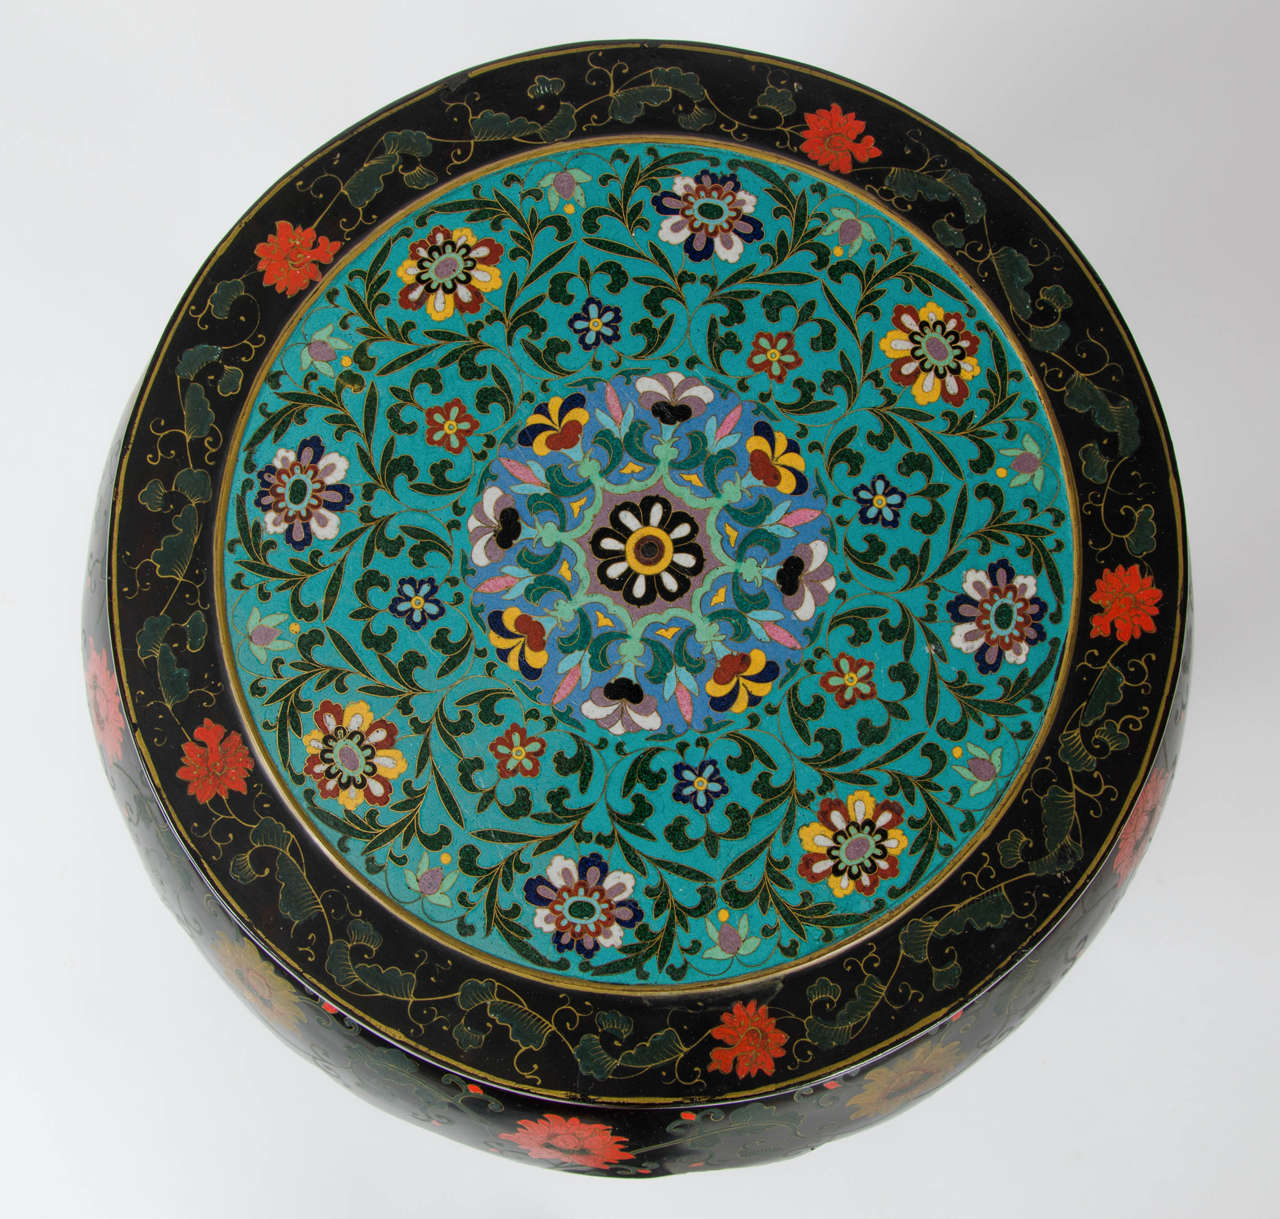 20th century Chinese Black Lacquered Side Table with Cloisonné Top im Zustand „Hervorragend“ in London, GB